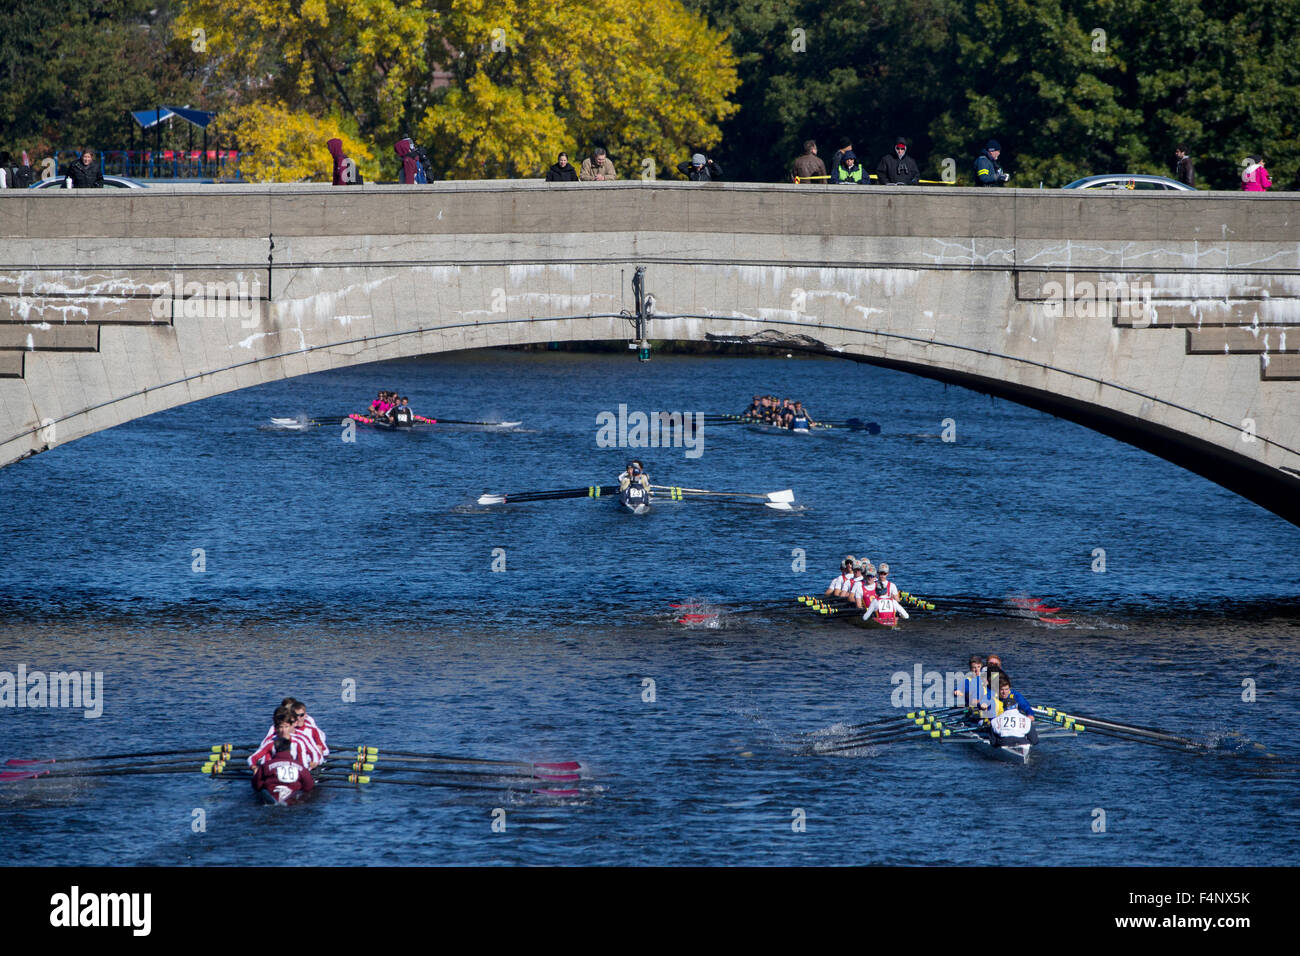 Teams on the Charles River in Cambridge Massachusetts during the Head of the Charles Regatta. Stock Photo